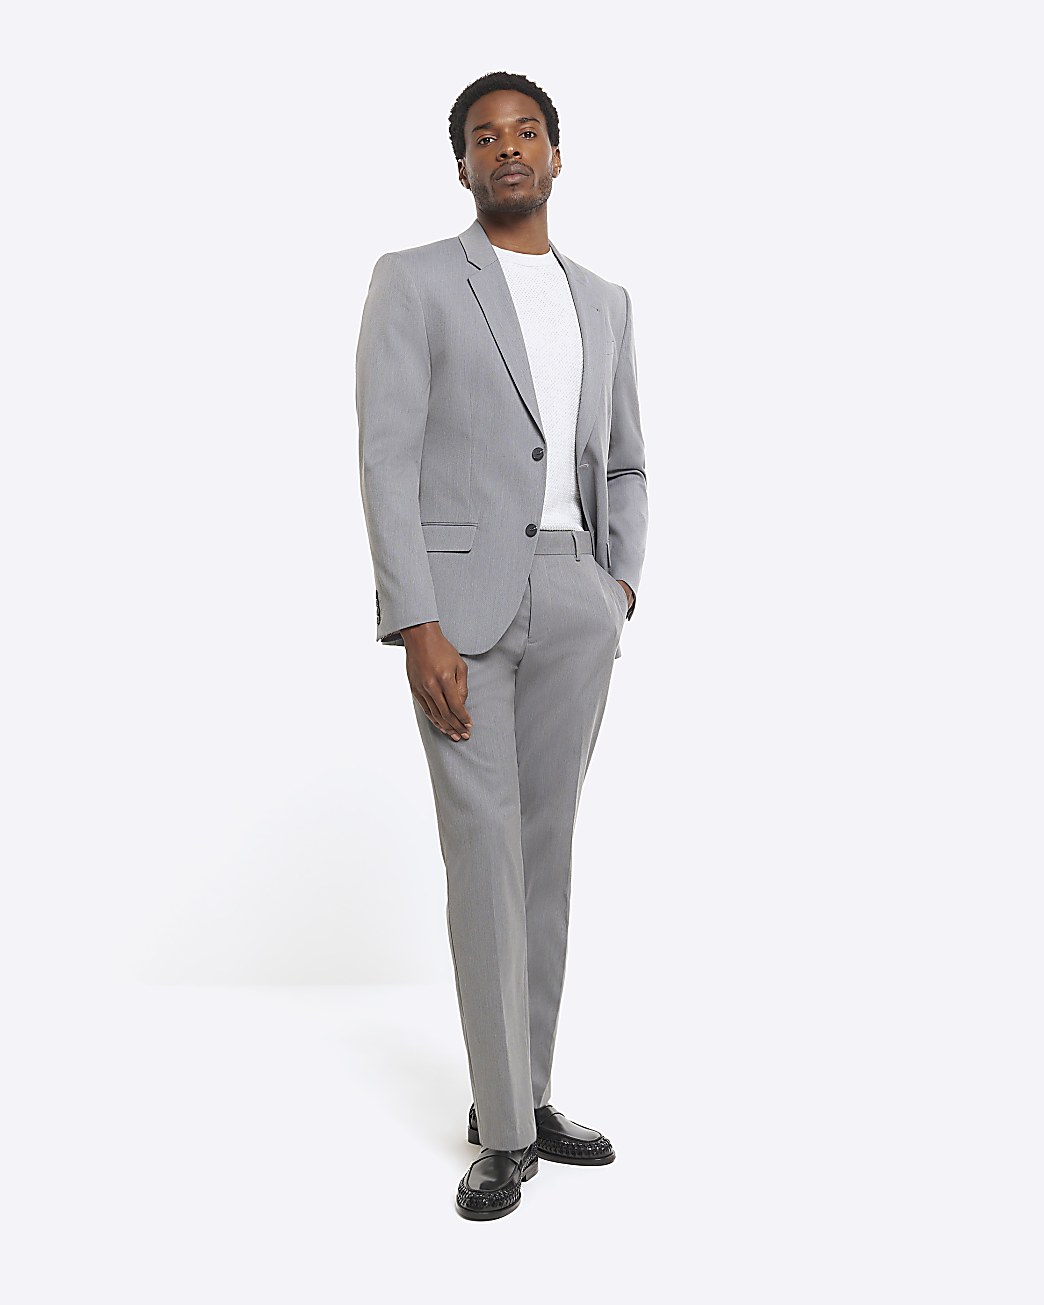 10 Dapper Grey Suits You'll Fall In Love With  Grey suit styling, Grey suit  men, Black and grey suit